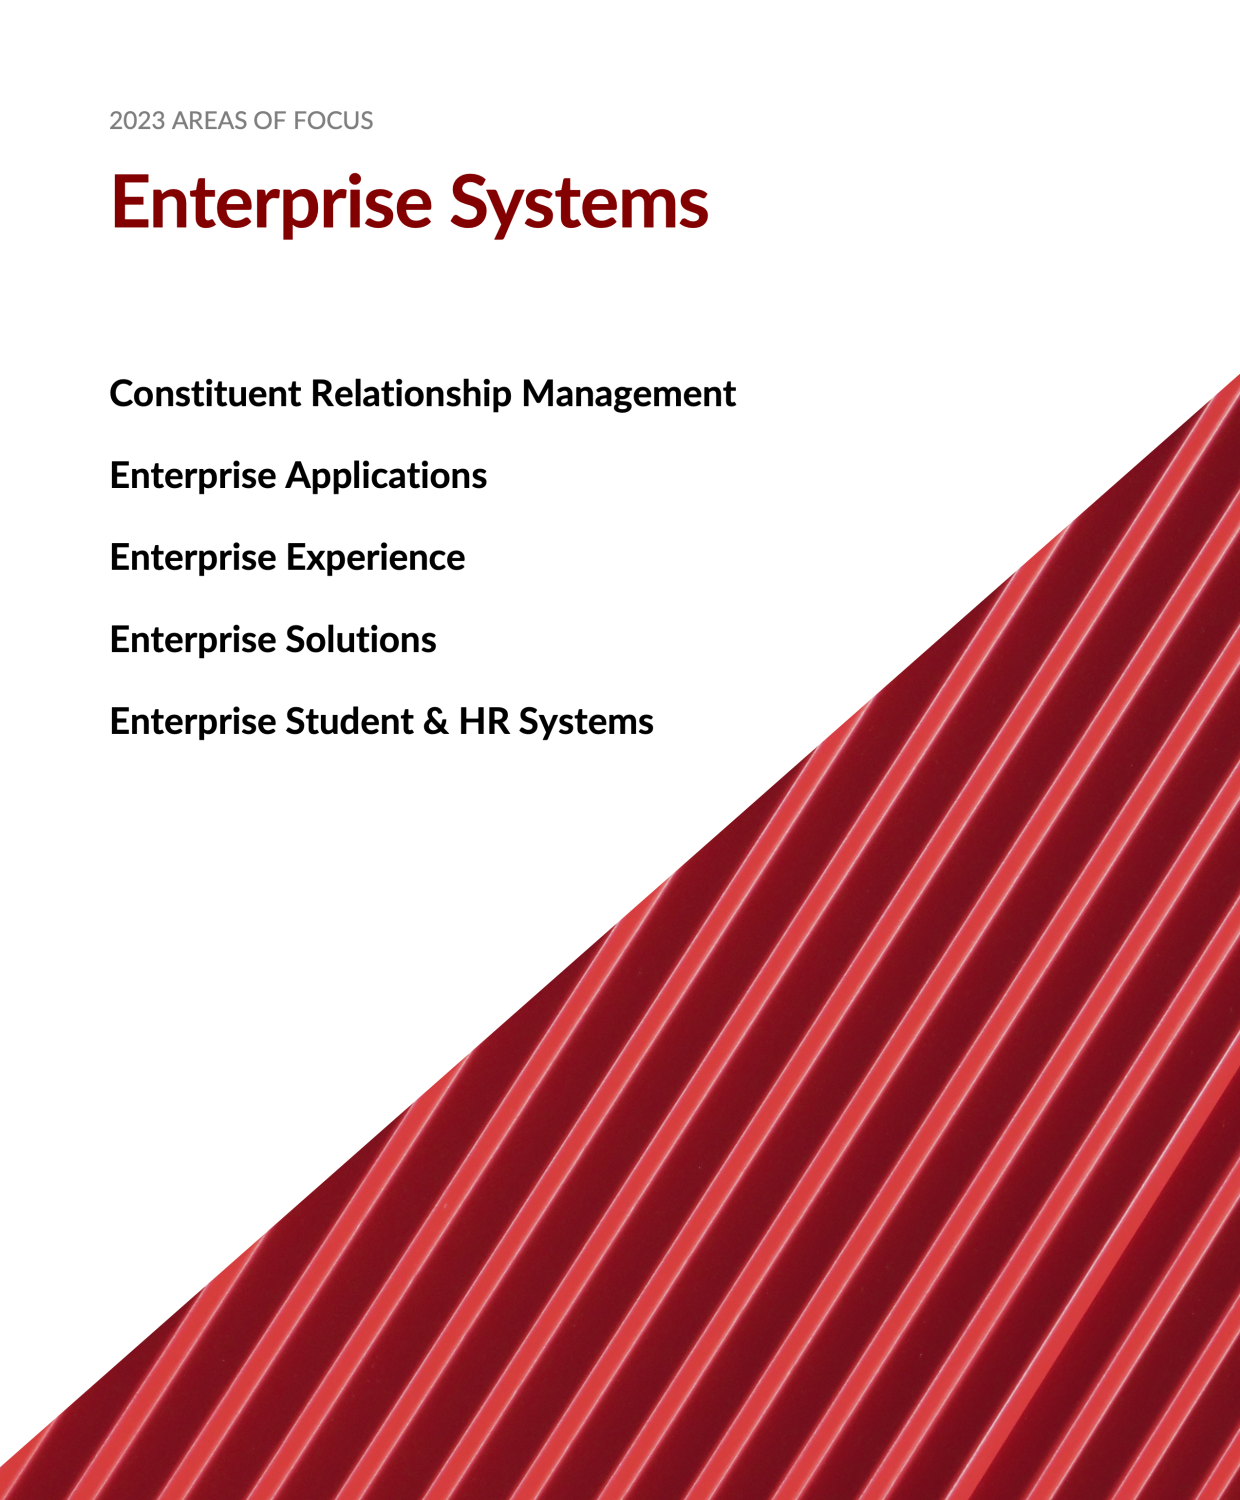 Cover image for 2023 Enterprise Systems Areas of Focus